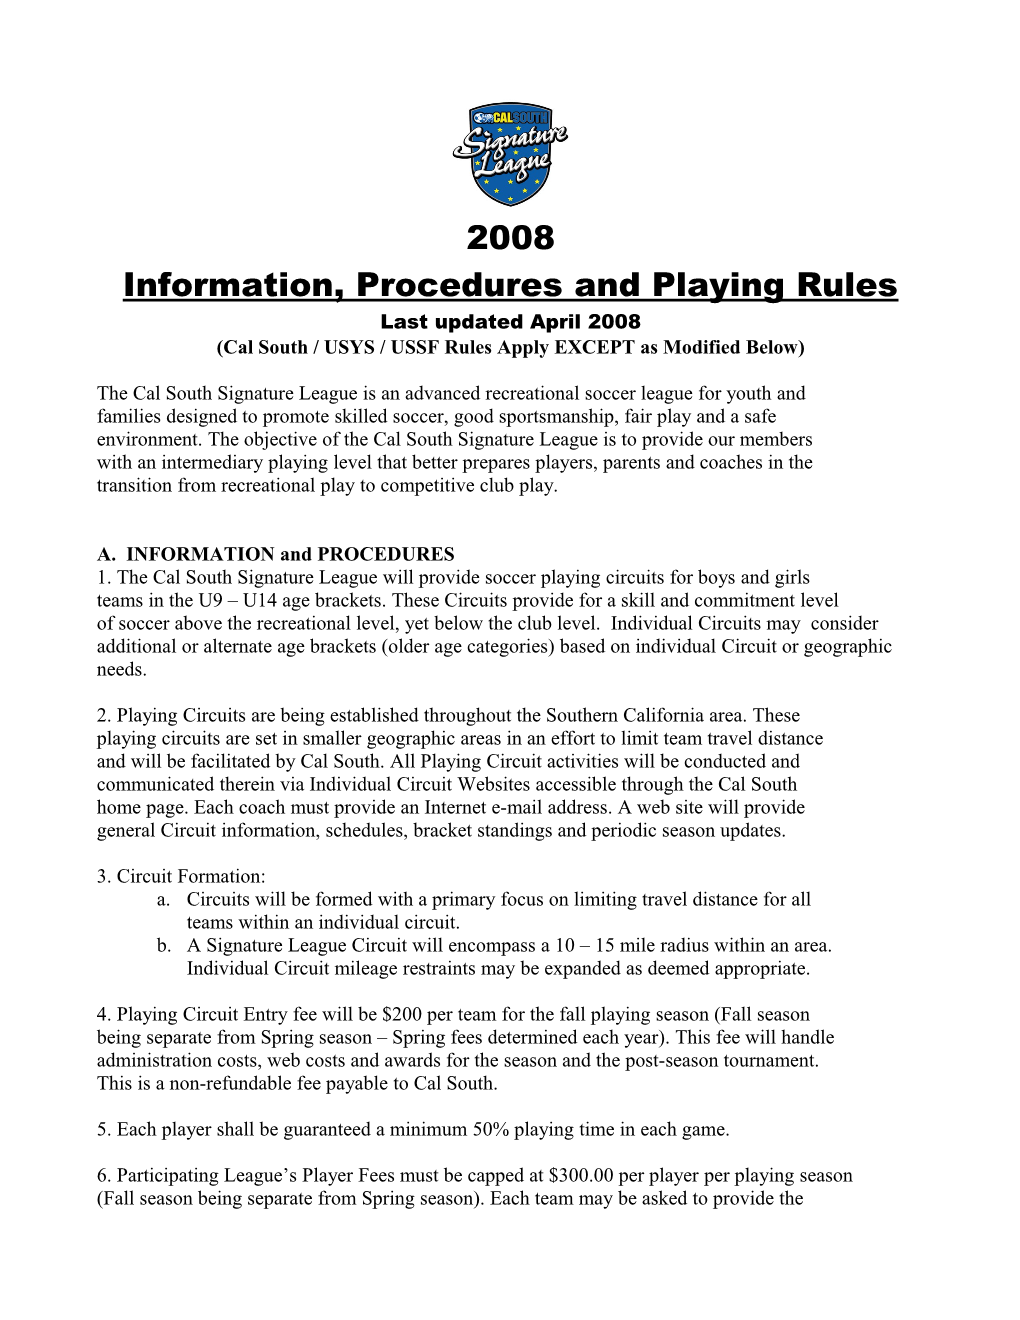 Information, Procedures and Playing Rules